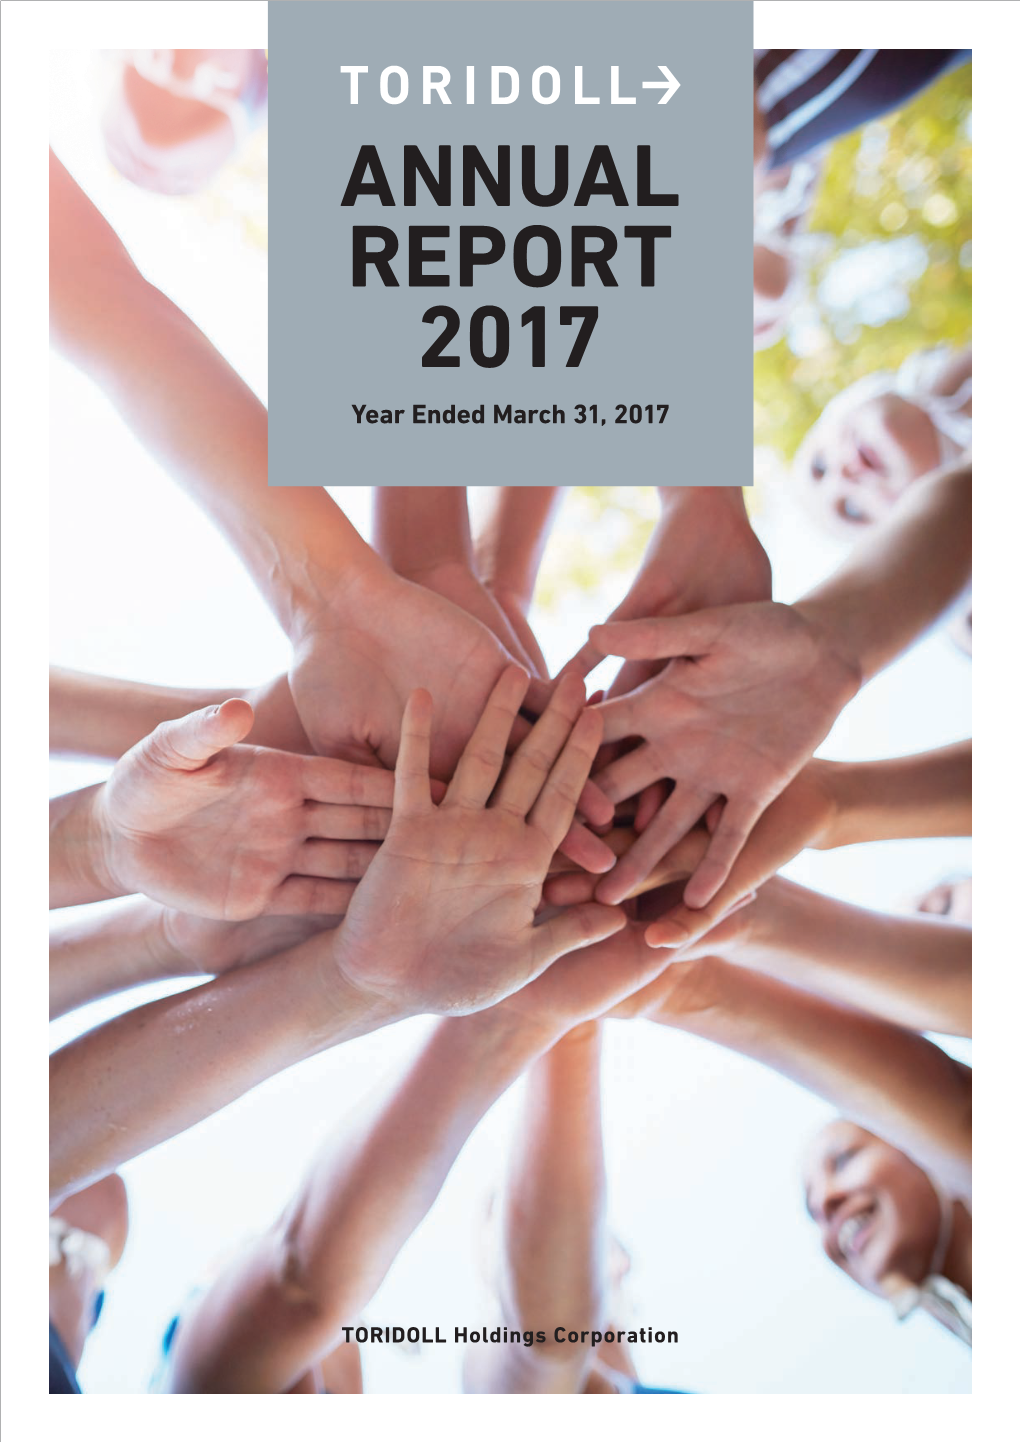 ANNUAL REPORT 2017 Year Ended March 31, 2017